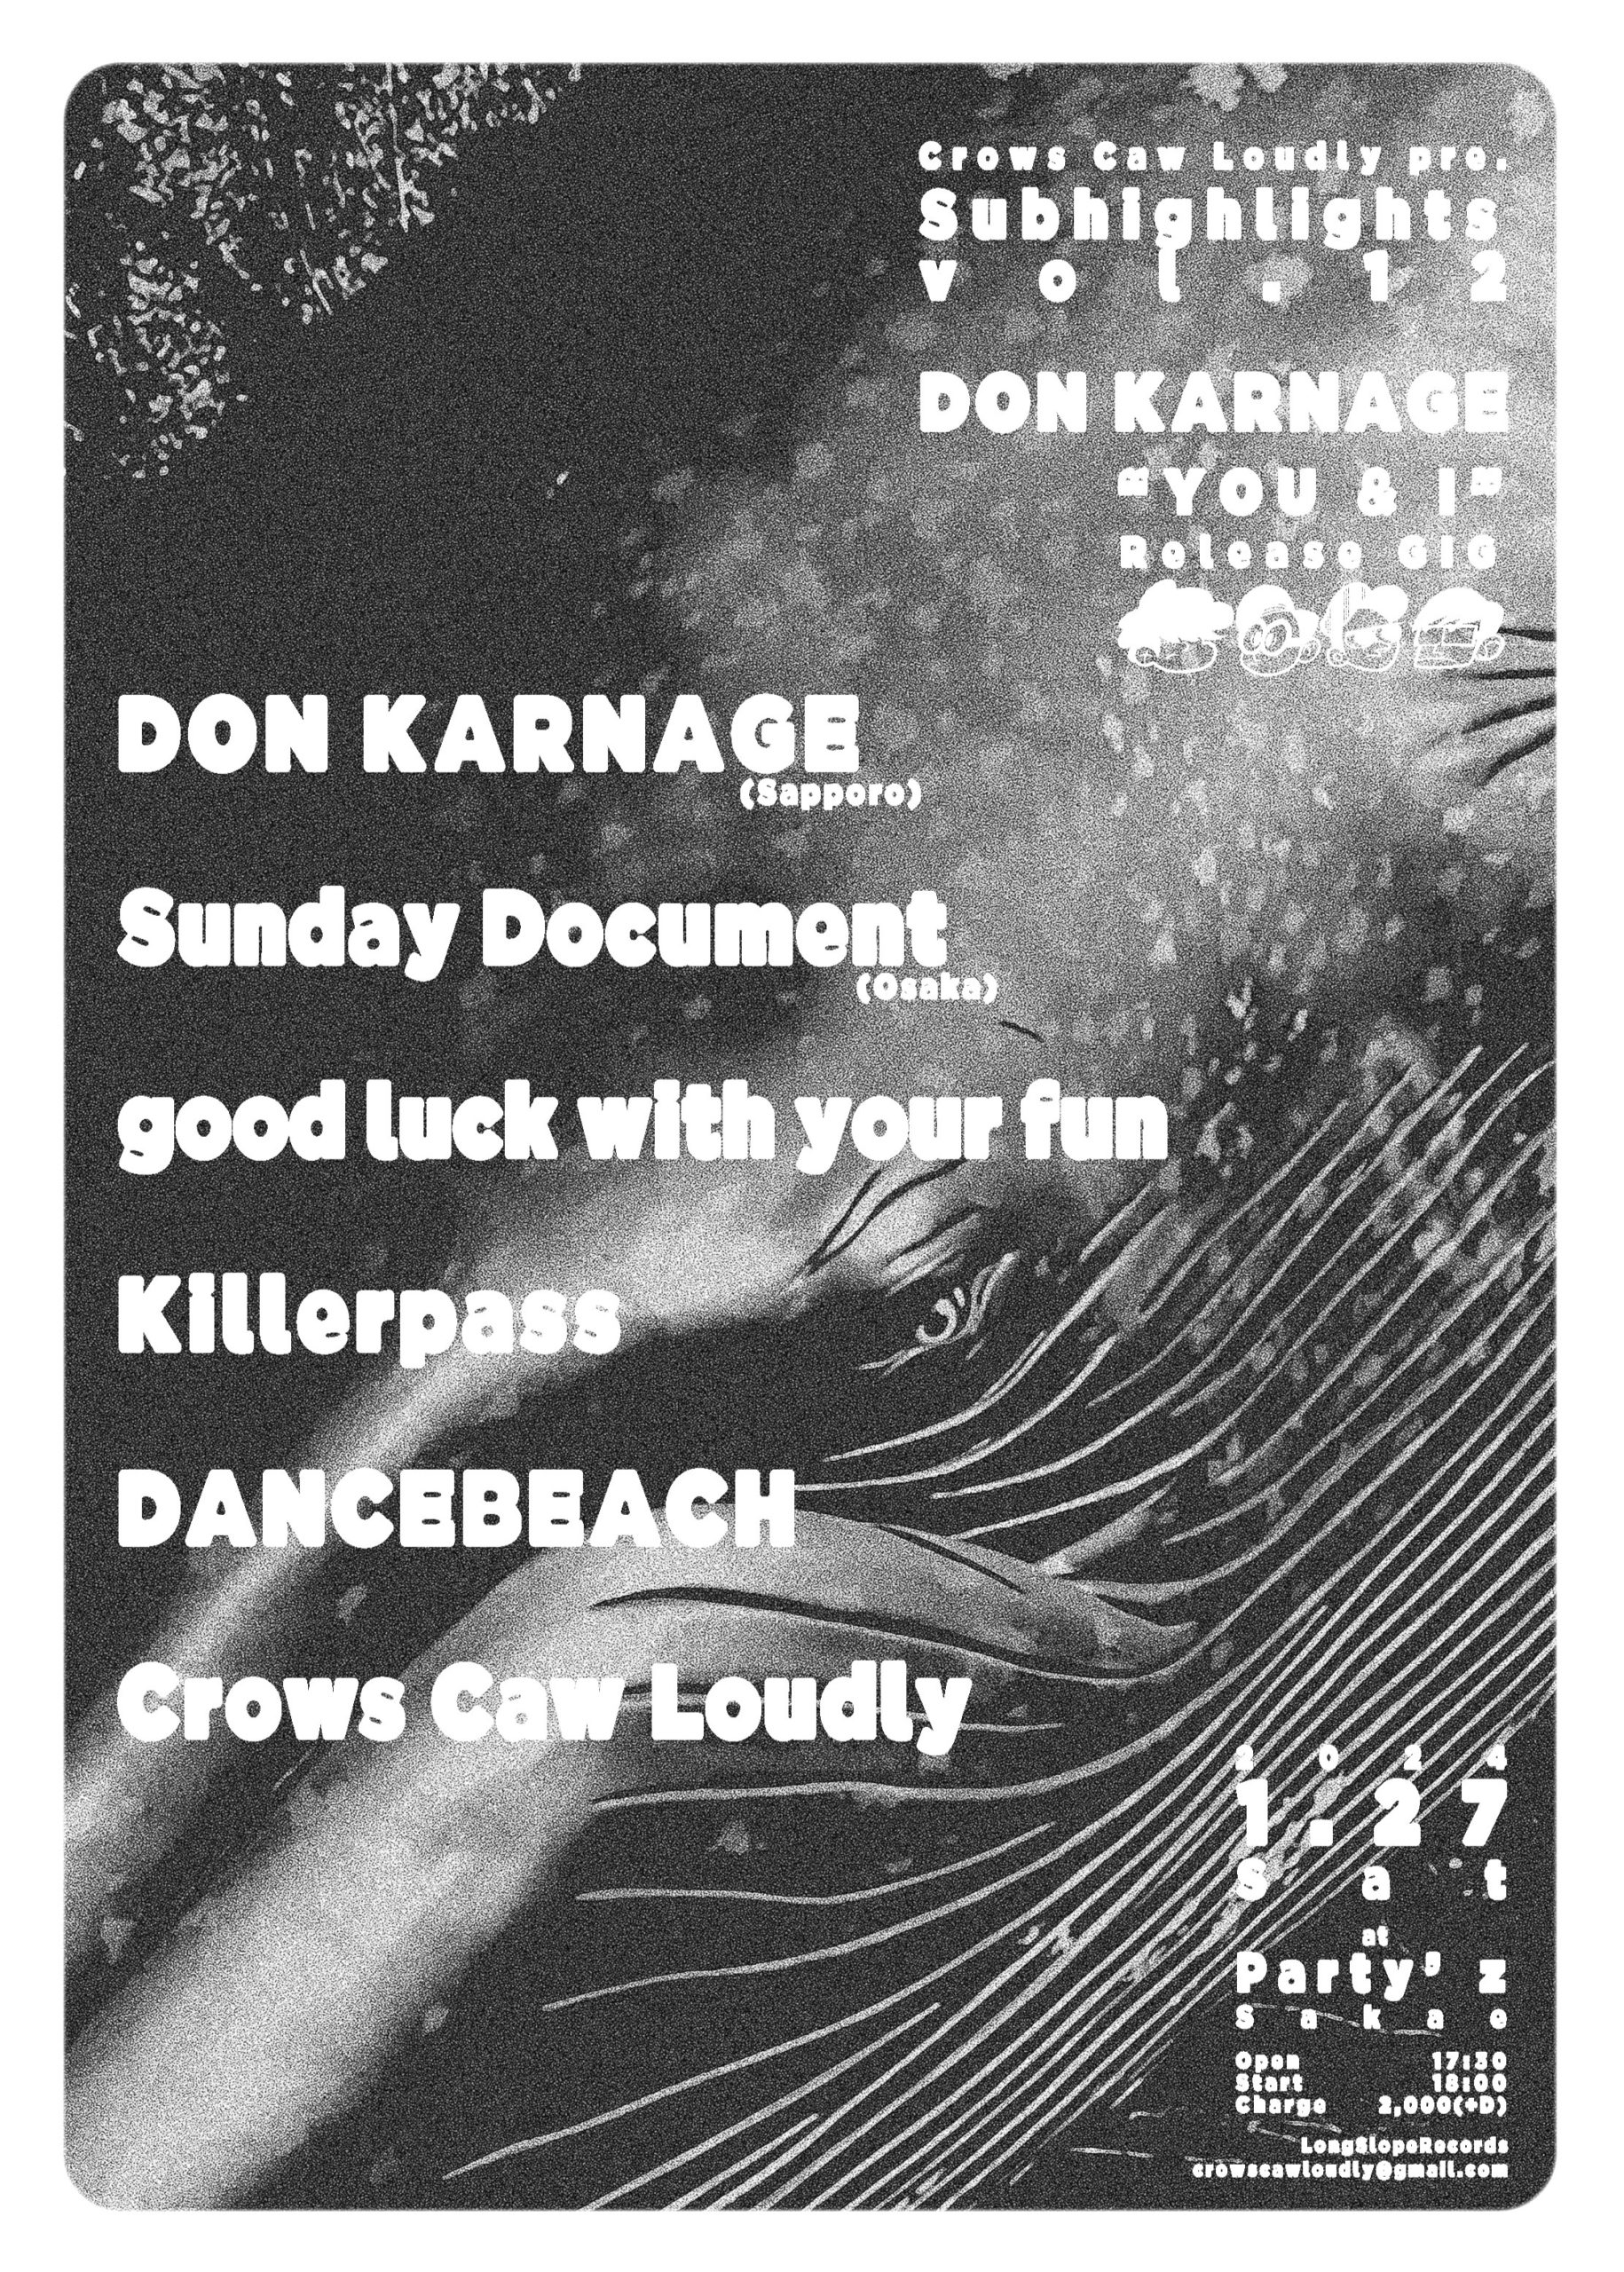 Crows Caw Loudly pre. SubHighlights vol.12 DON KARNAGE "YOU & I" Release GIG